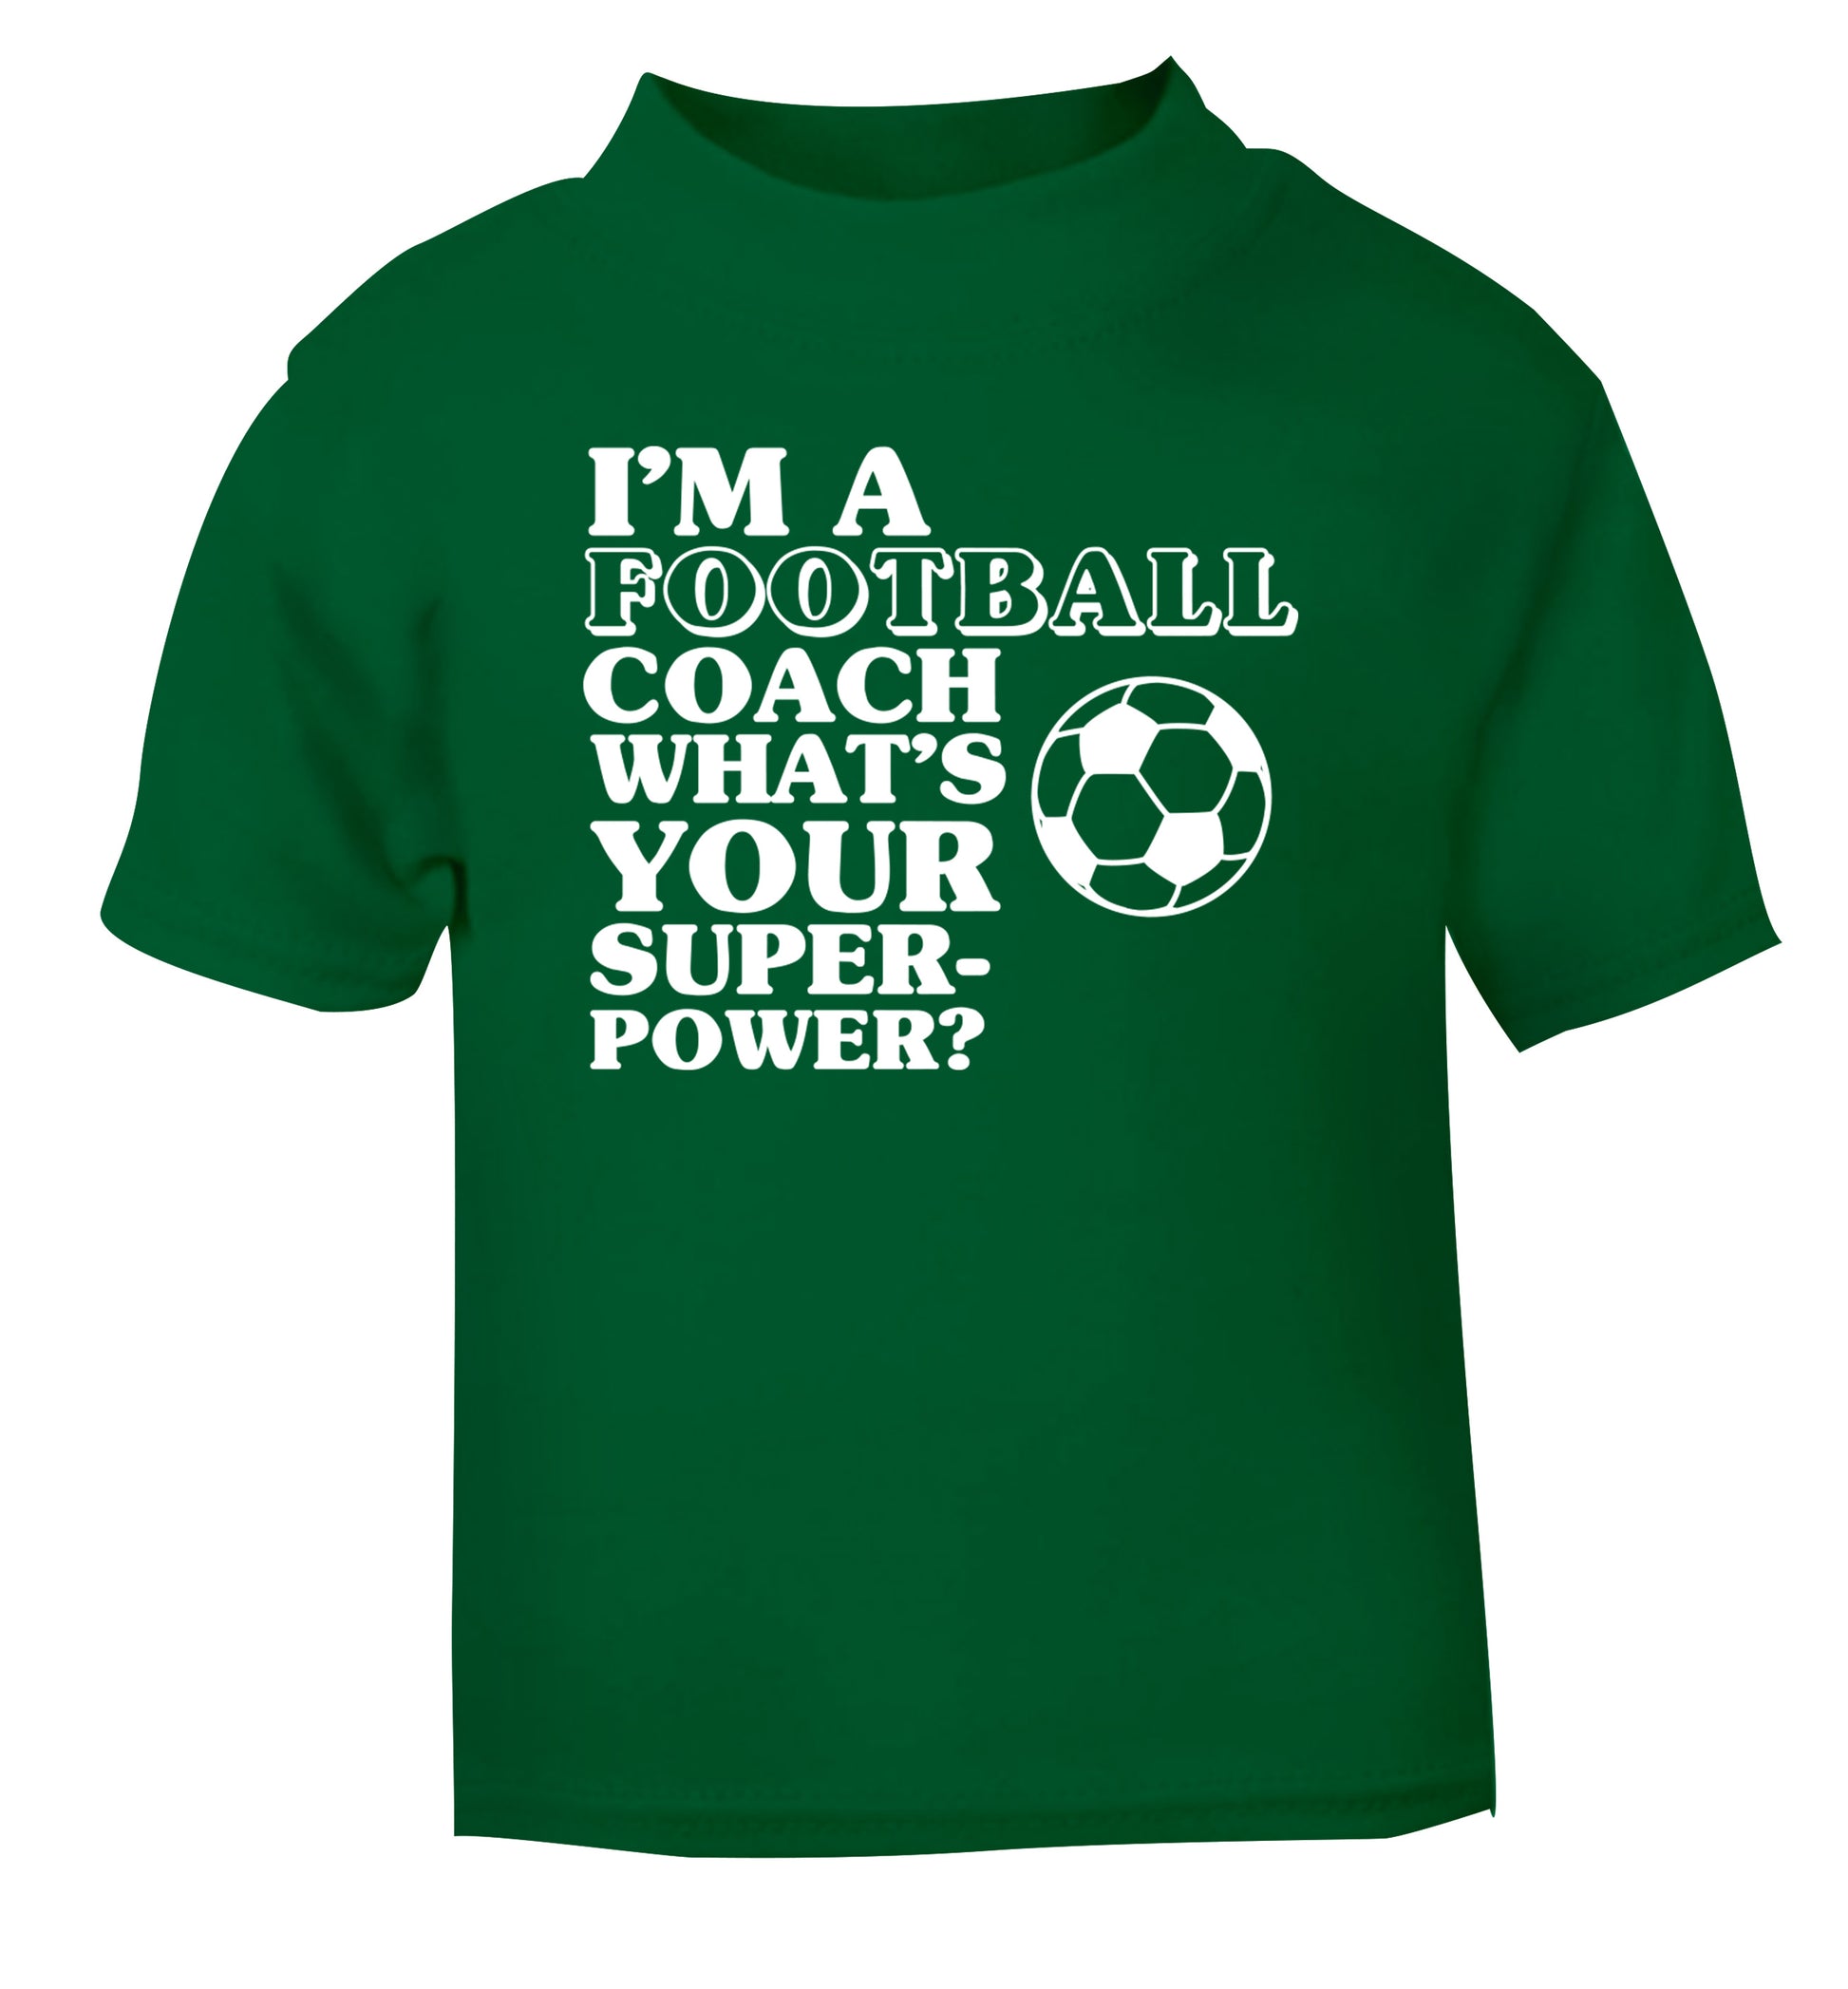 I'm a football coach what's your superpower? green Baby Toddler Tshirt 2 Years